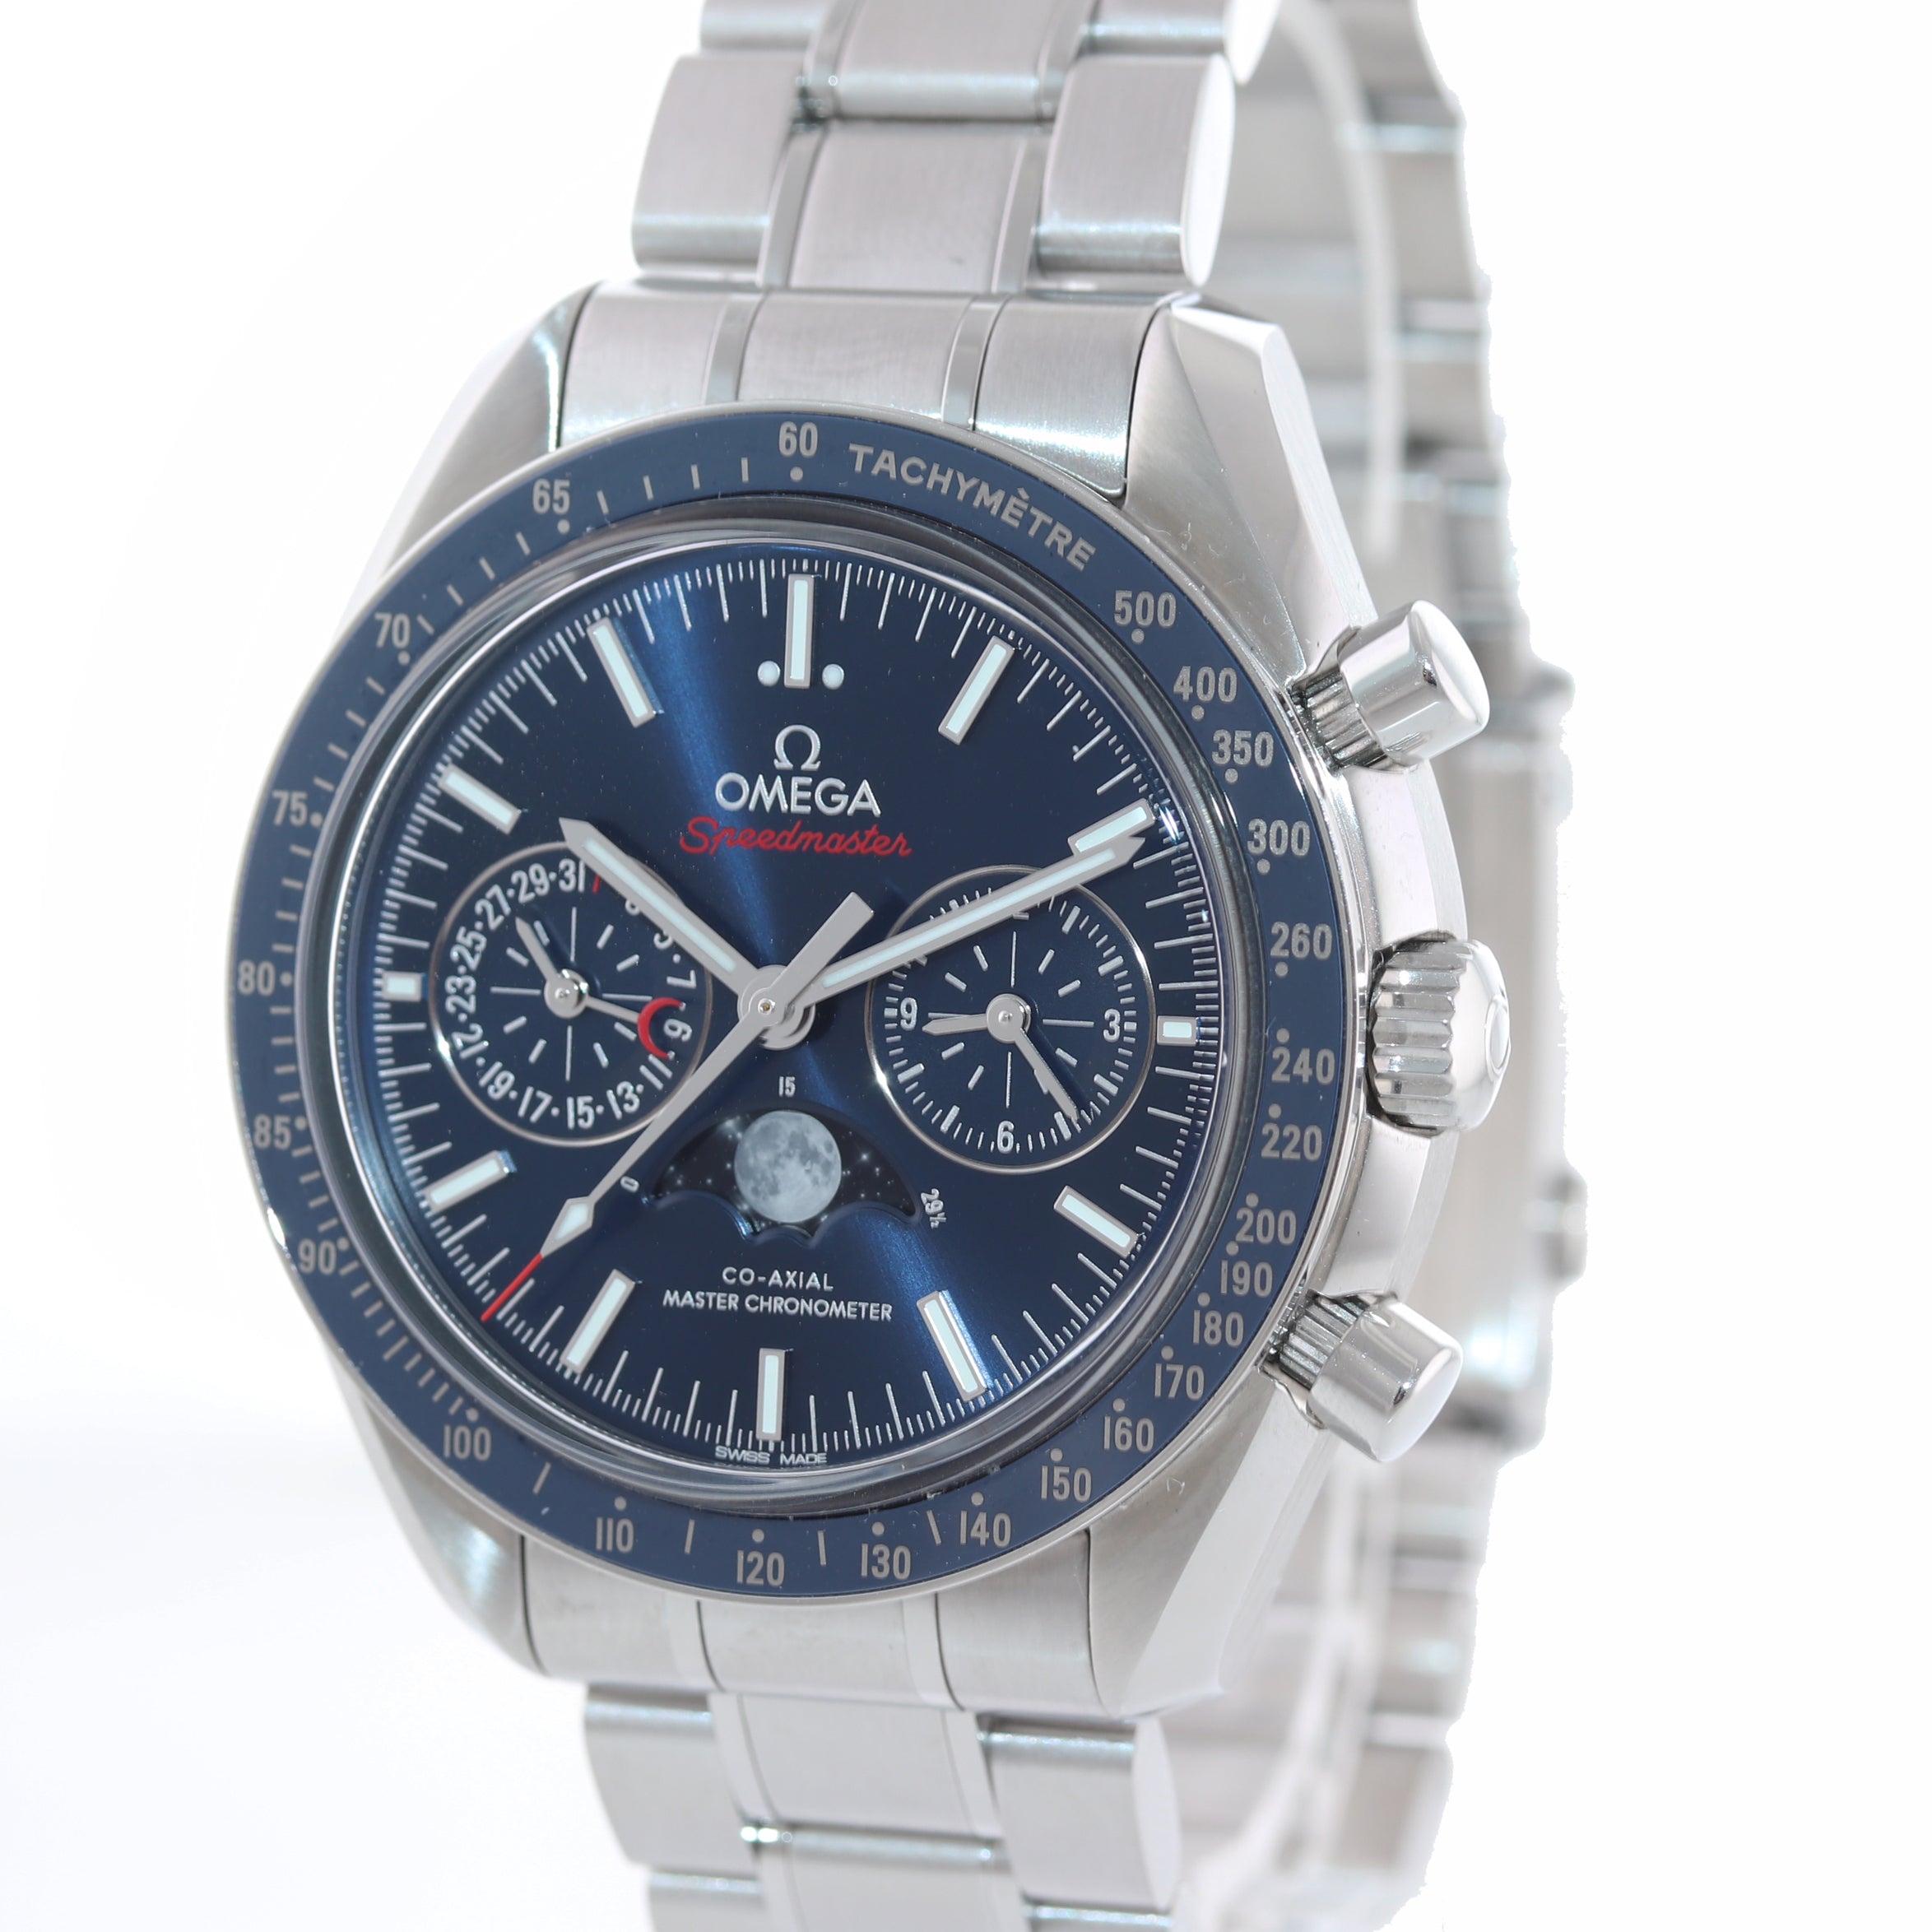 2020 PAPERS Omega Speedmaster Moonphase 304.33.44.52.03.001 Steel Blue Watch